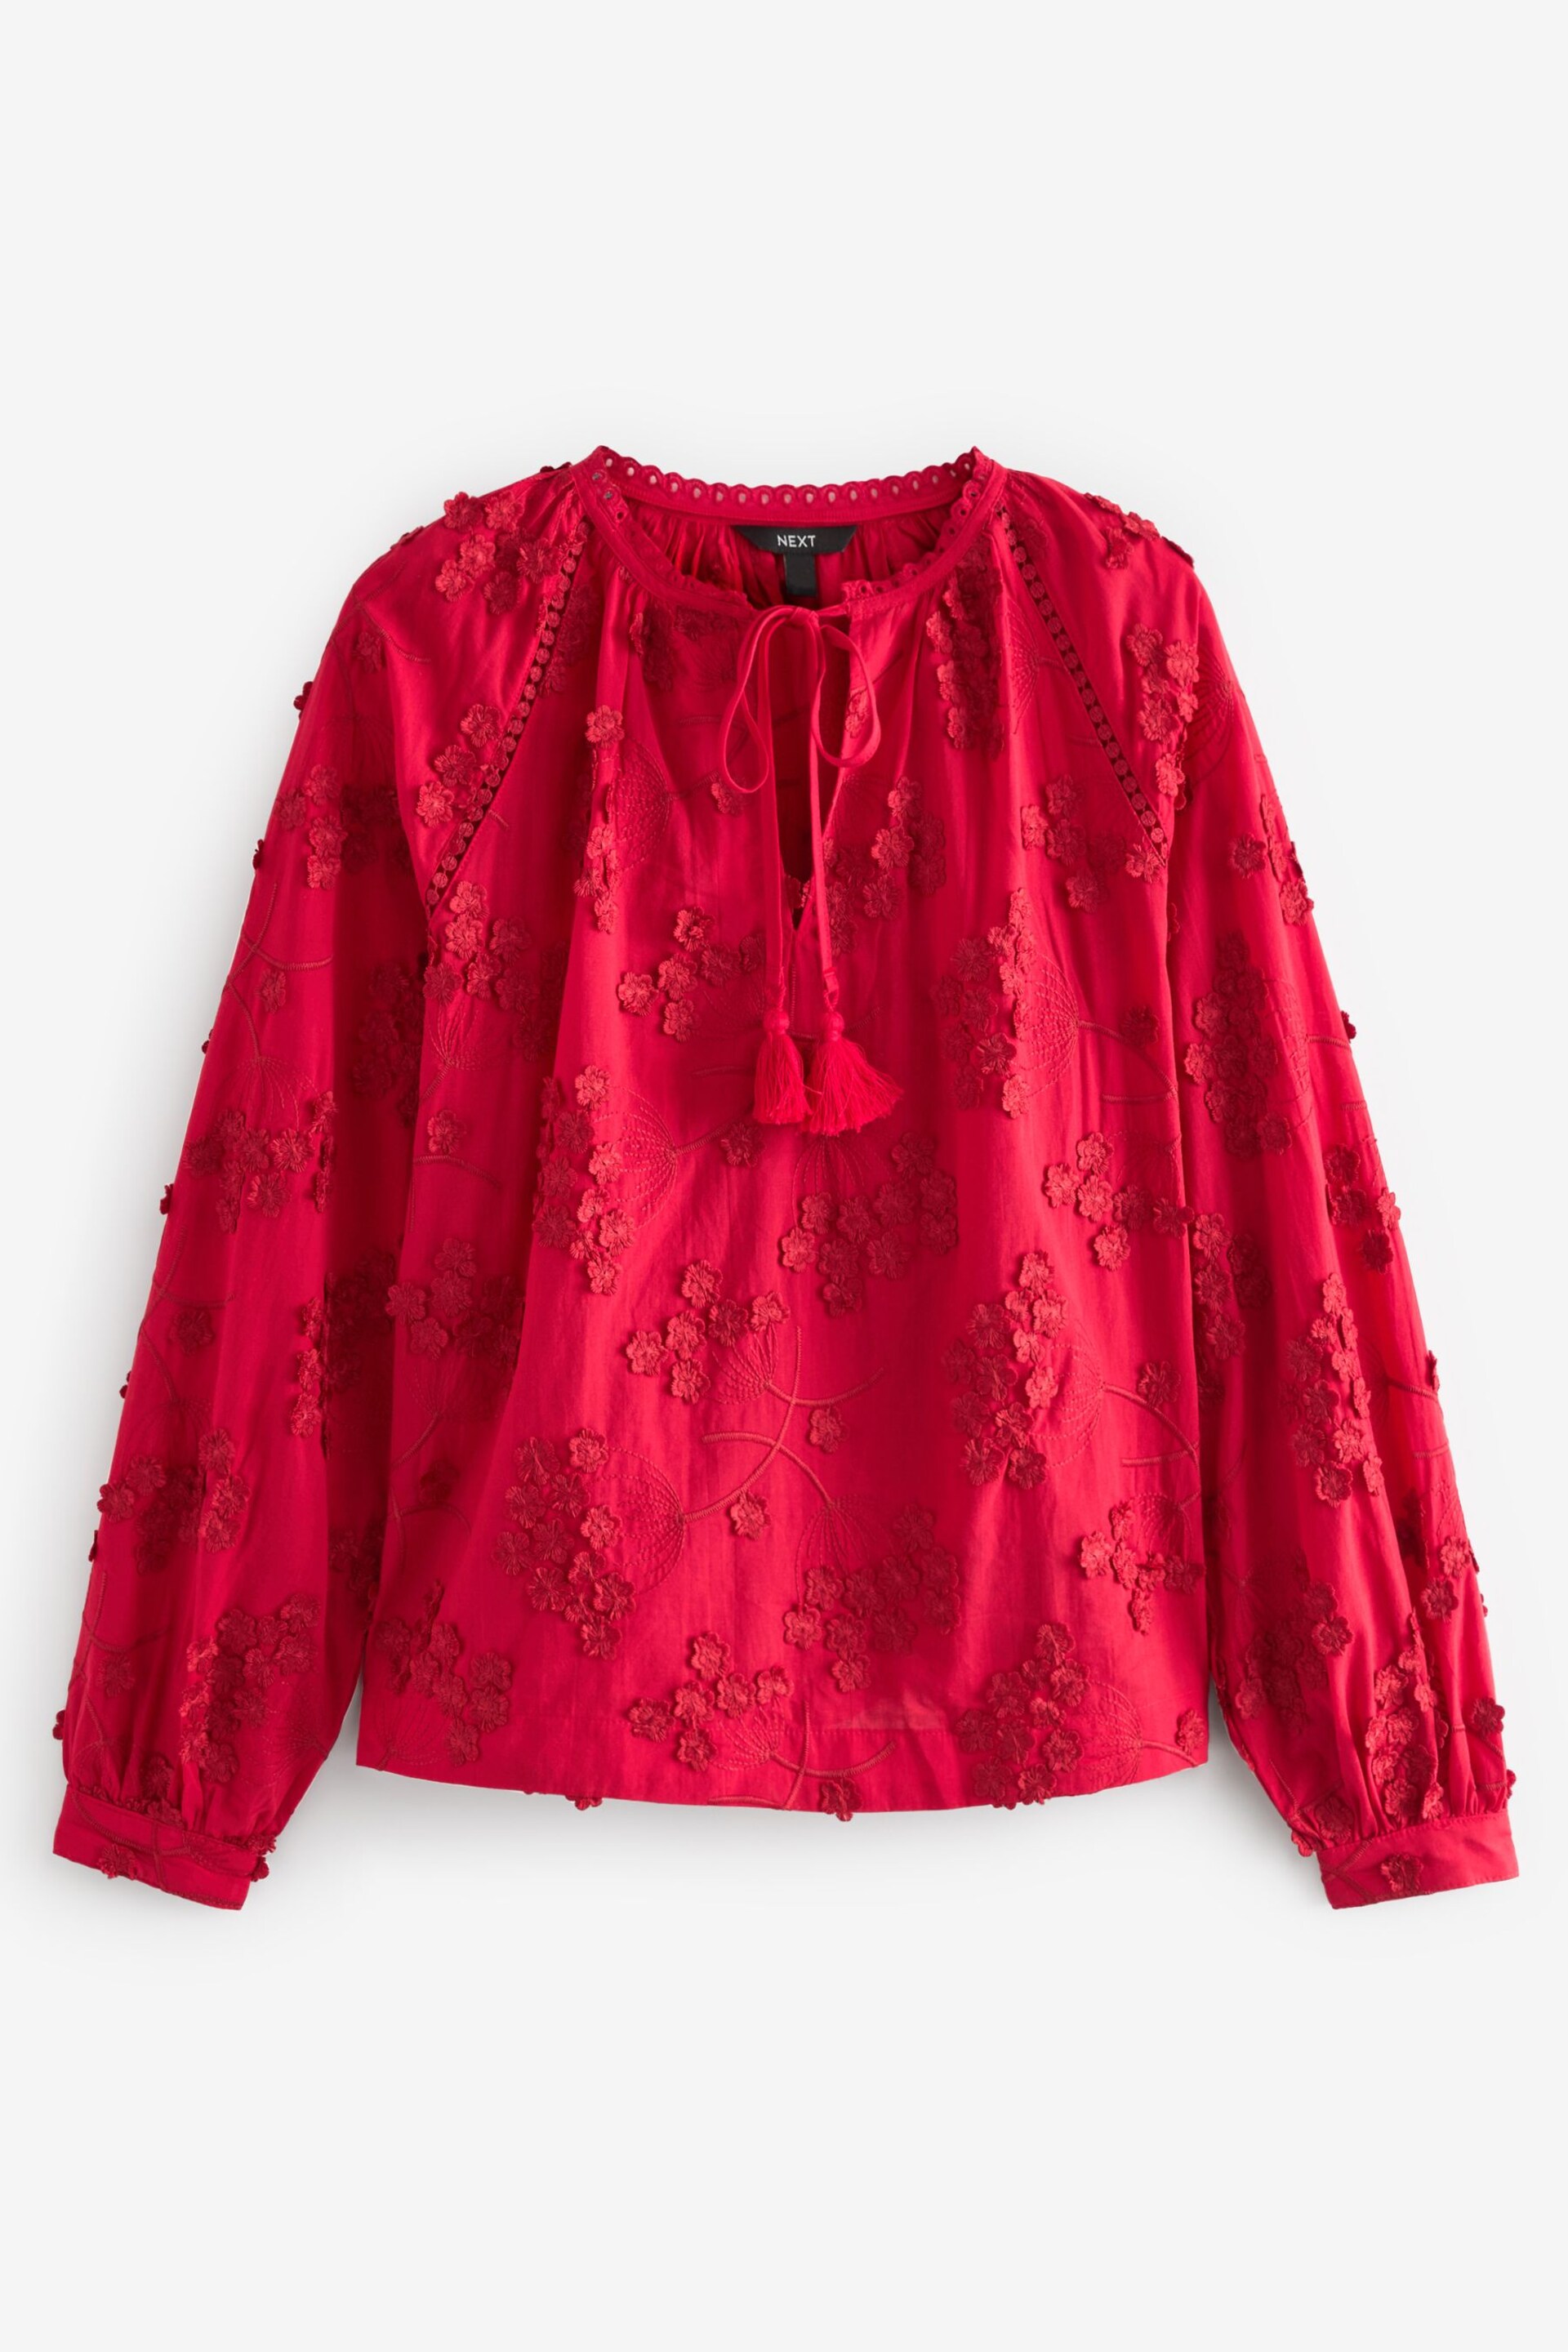 Red Tie Neck Floral Blouse - Image 6 of 7